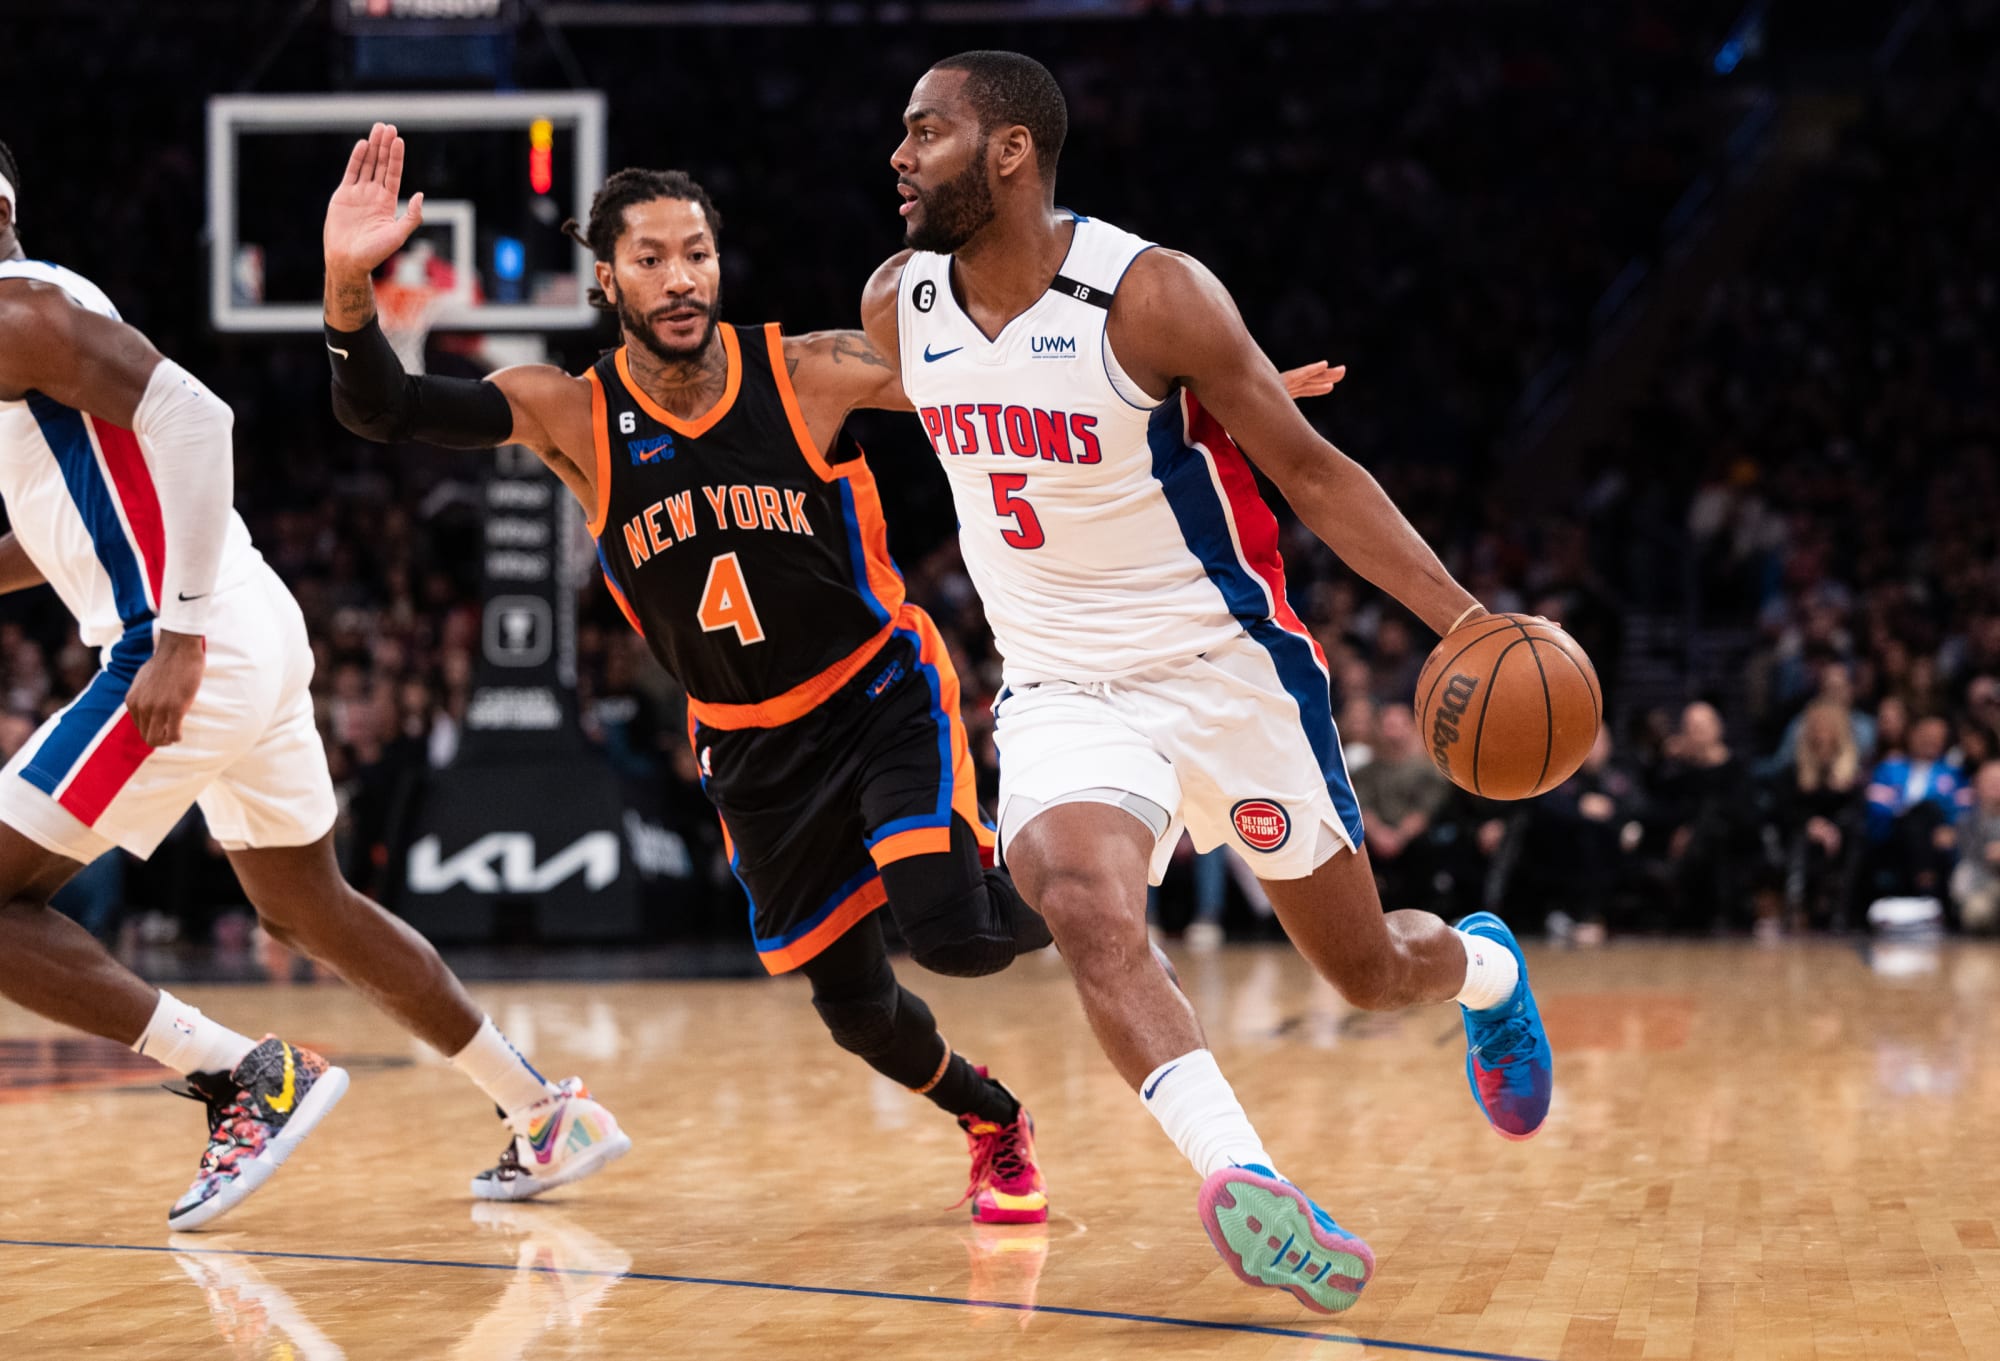 Knicks Game Tonight: Knicks vs Pistons Odds, Starting Lineup, Injury Report, Predictions, TV Channel for Nov. 28